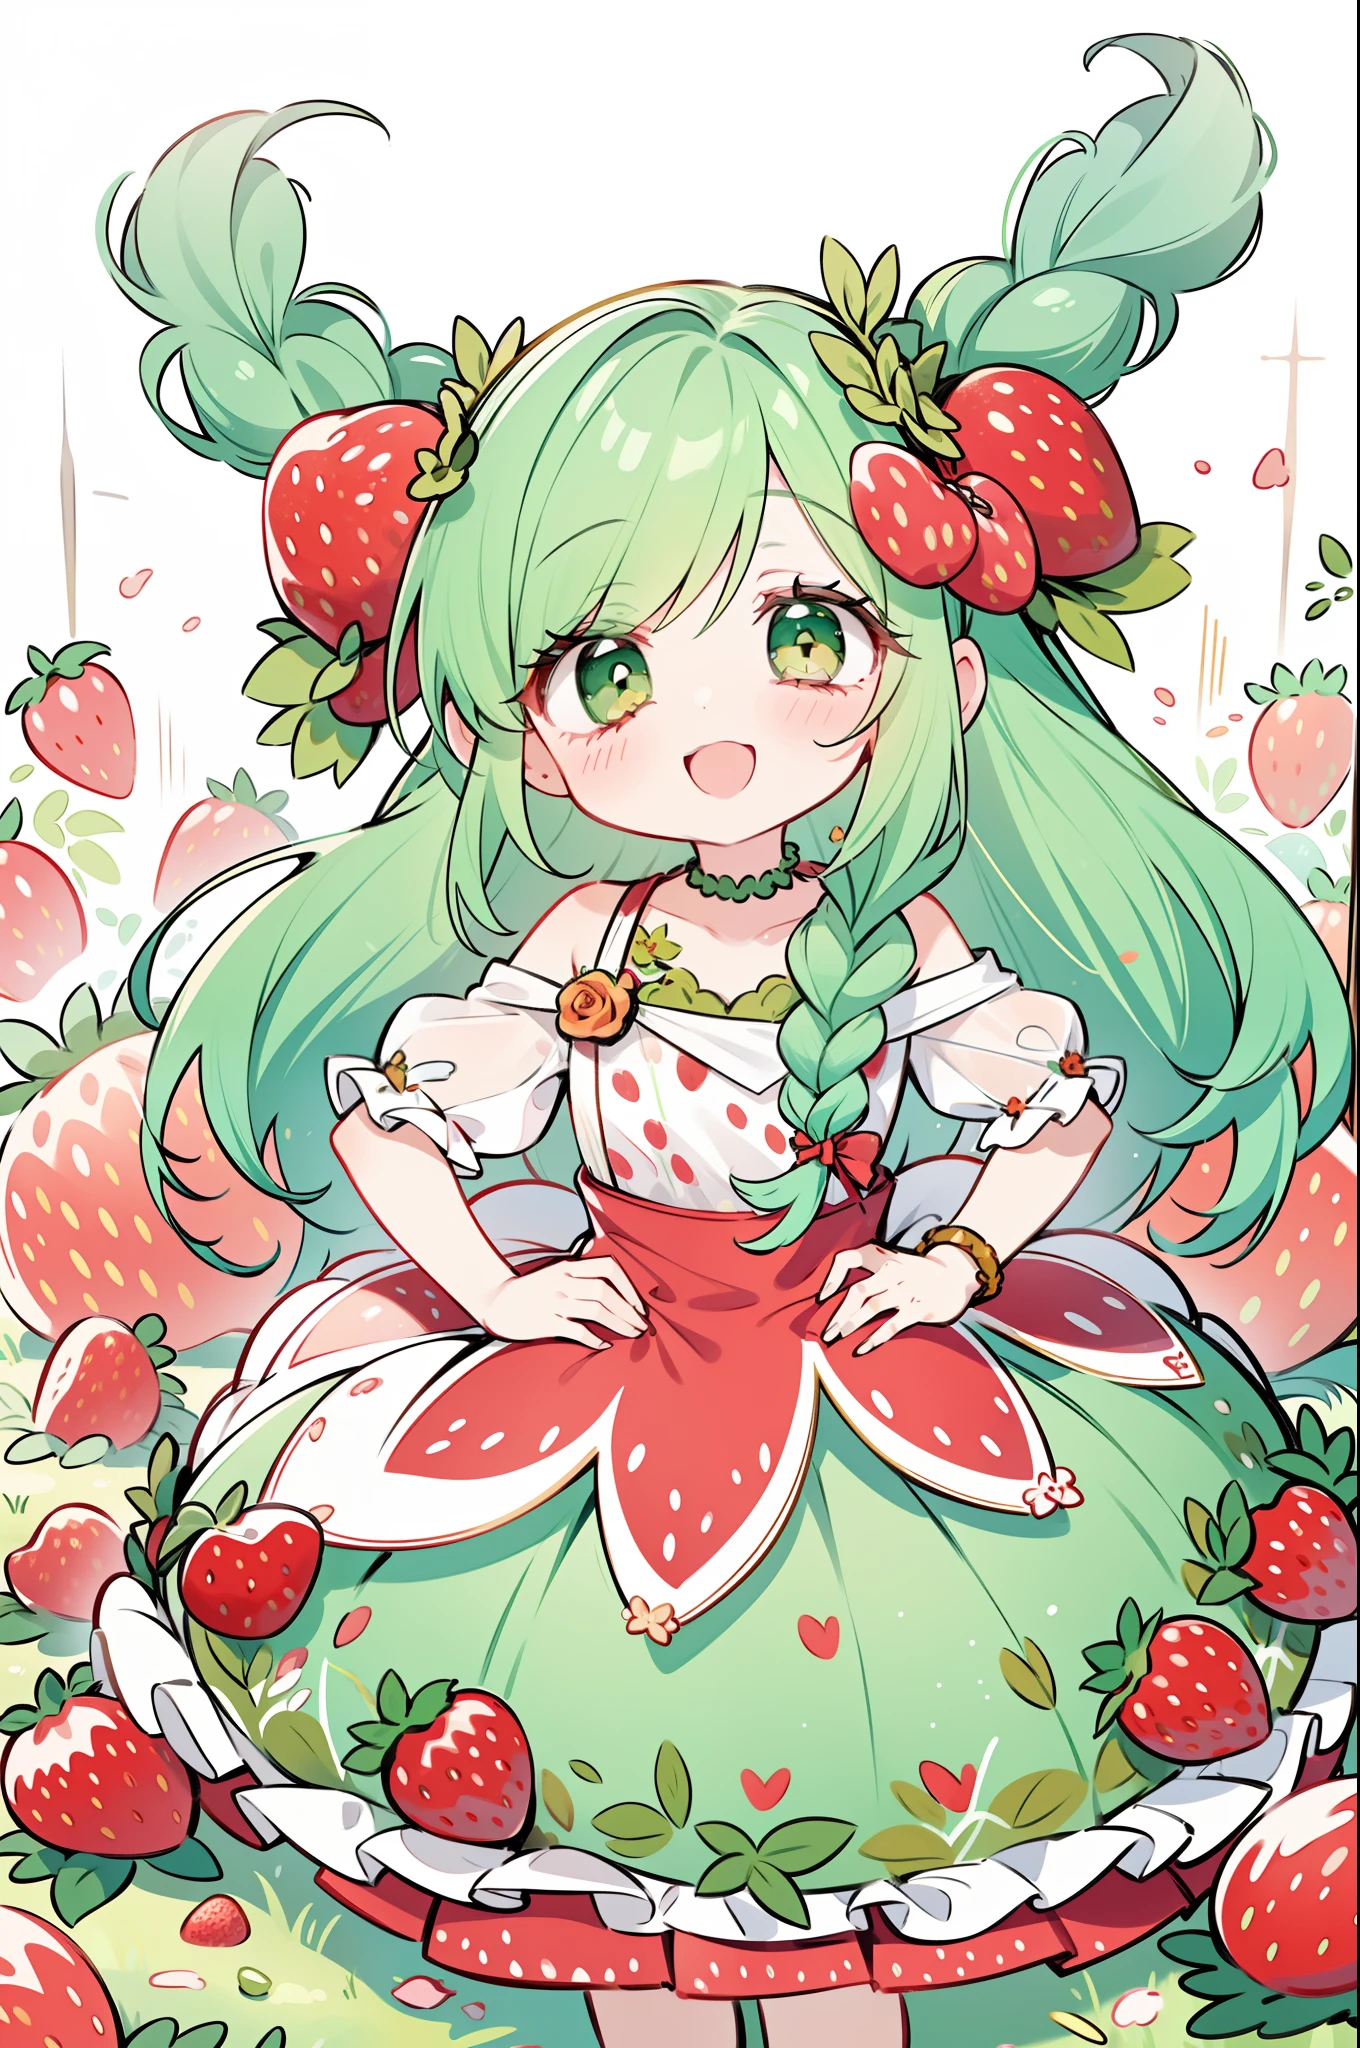 1girl, wearing a (rose print) dress, in a ((strawberry field)), happy and smiling, mythical world with giant fruit  🍓, foamy teal light muted color palette🎨, hands in hips, energetic, fashion dress, fruits, long hair in braids, foam green hair